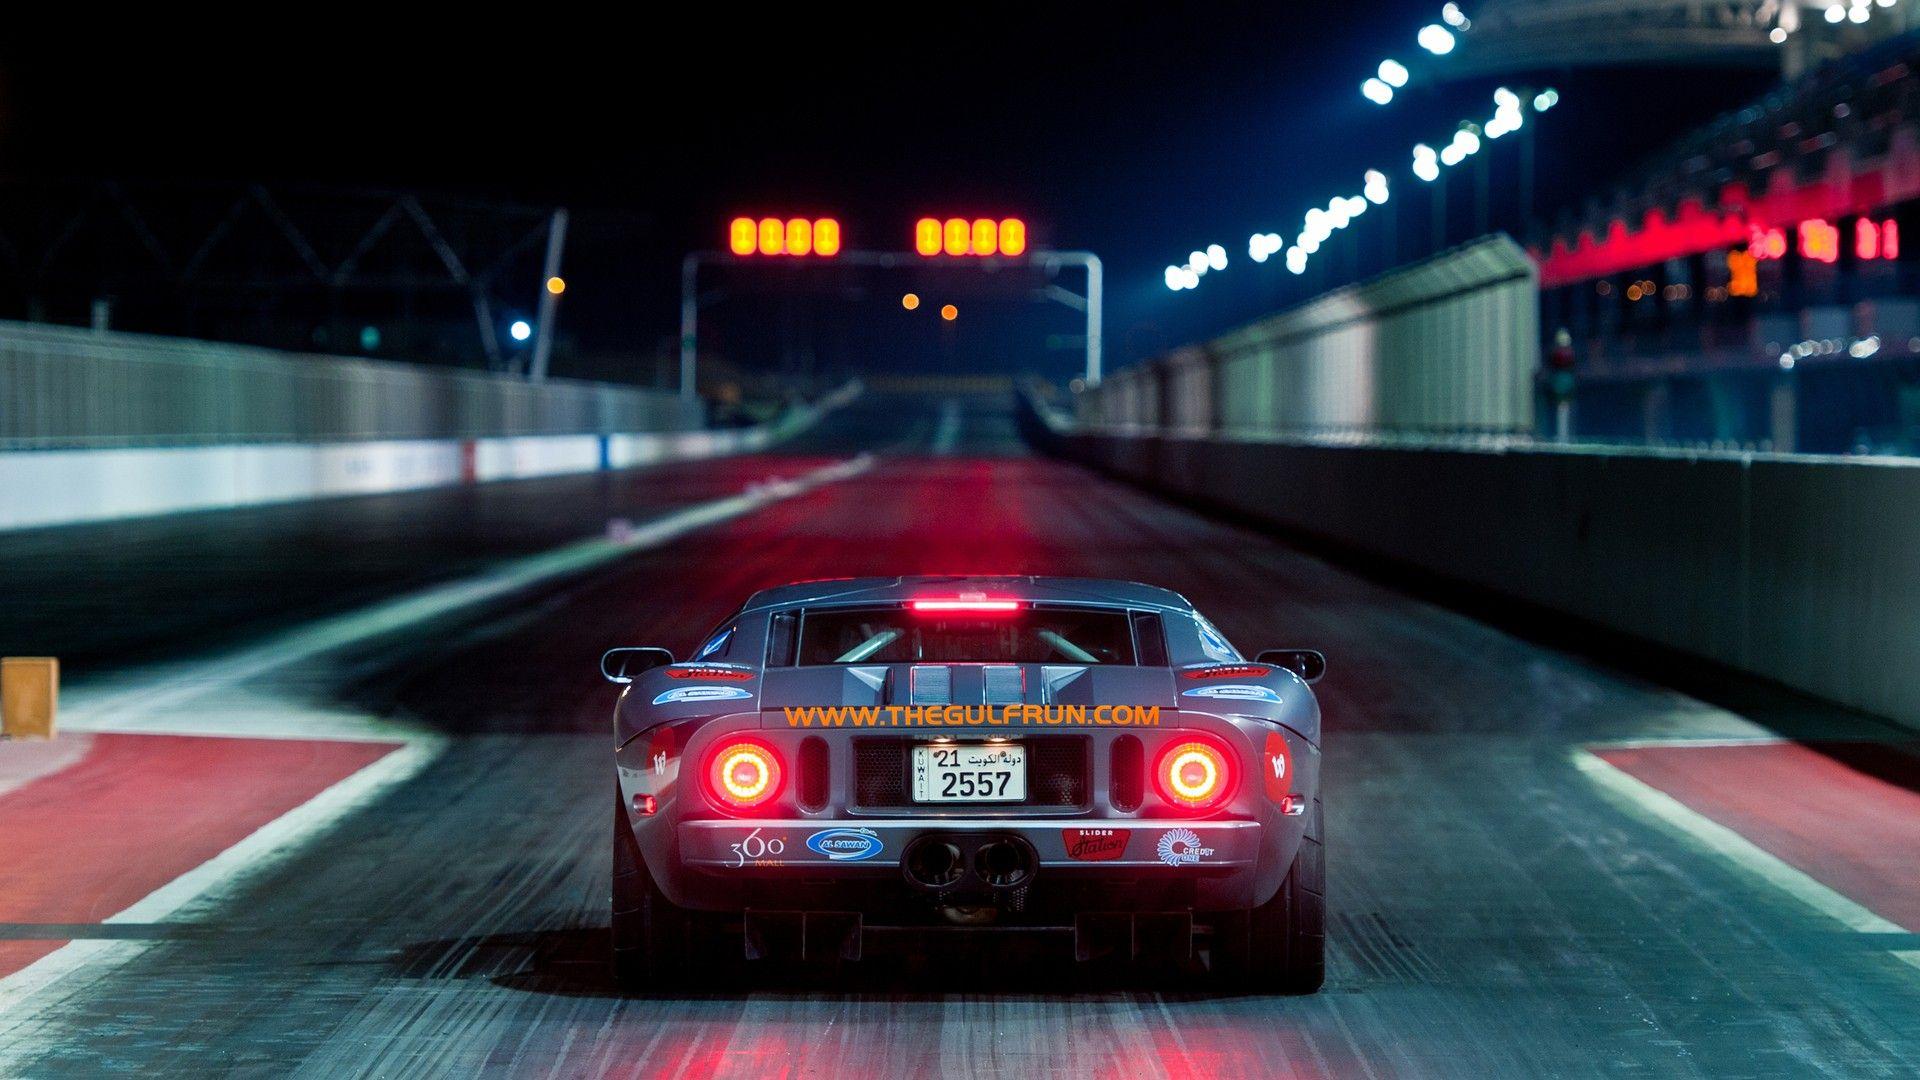 Download the Ford GT Drag Wallpaper, Ford GT Drag iPhone Wallpaper